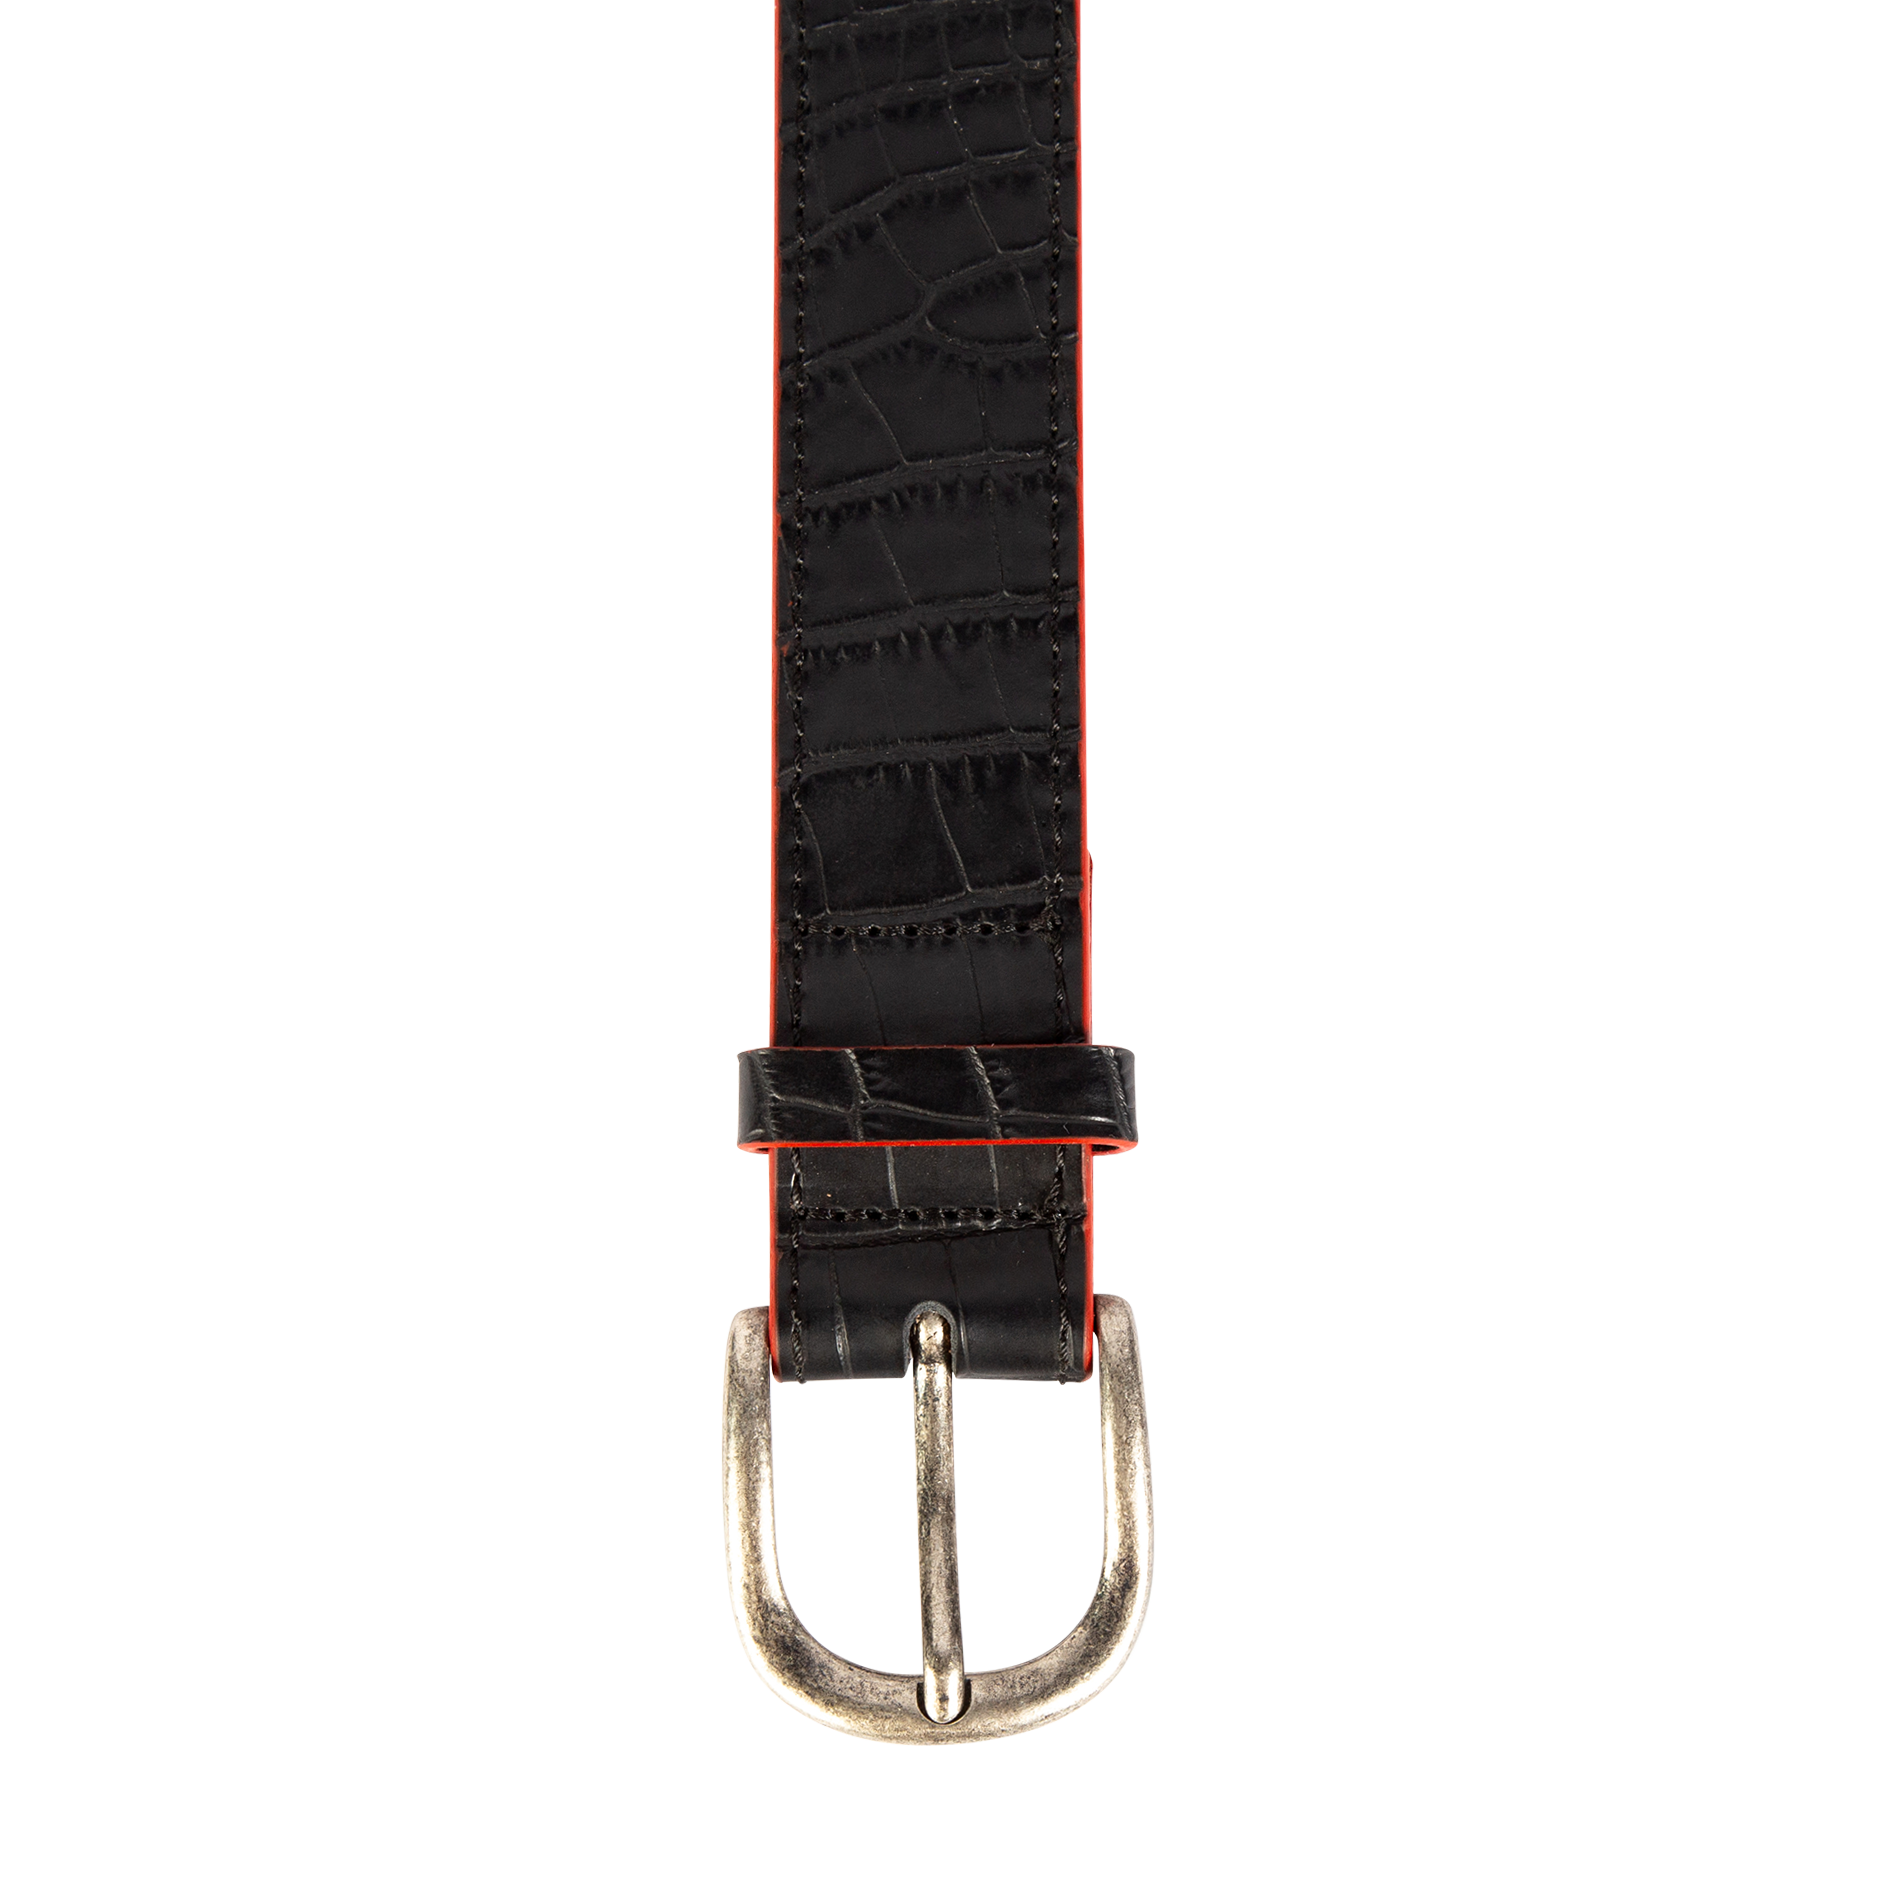 Classic black croco top view with silver buckle hardware on FREEBIRD full grain leather belt